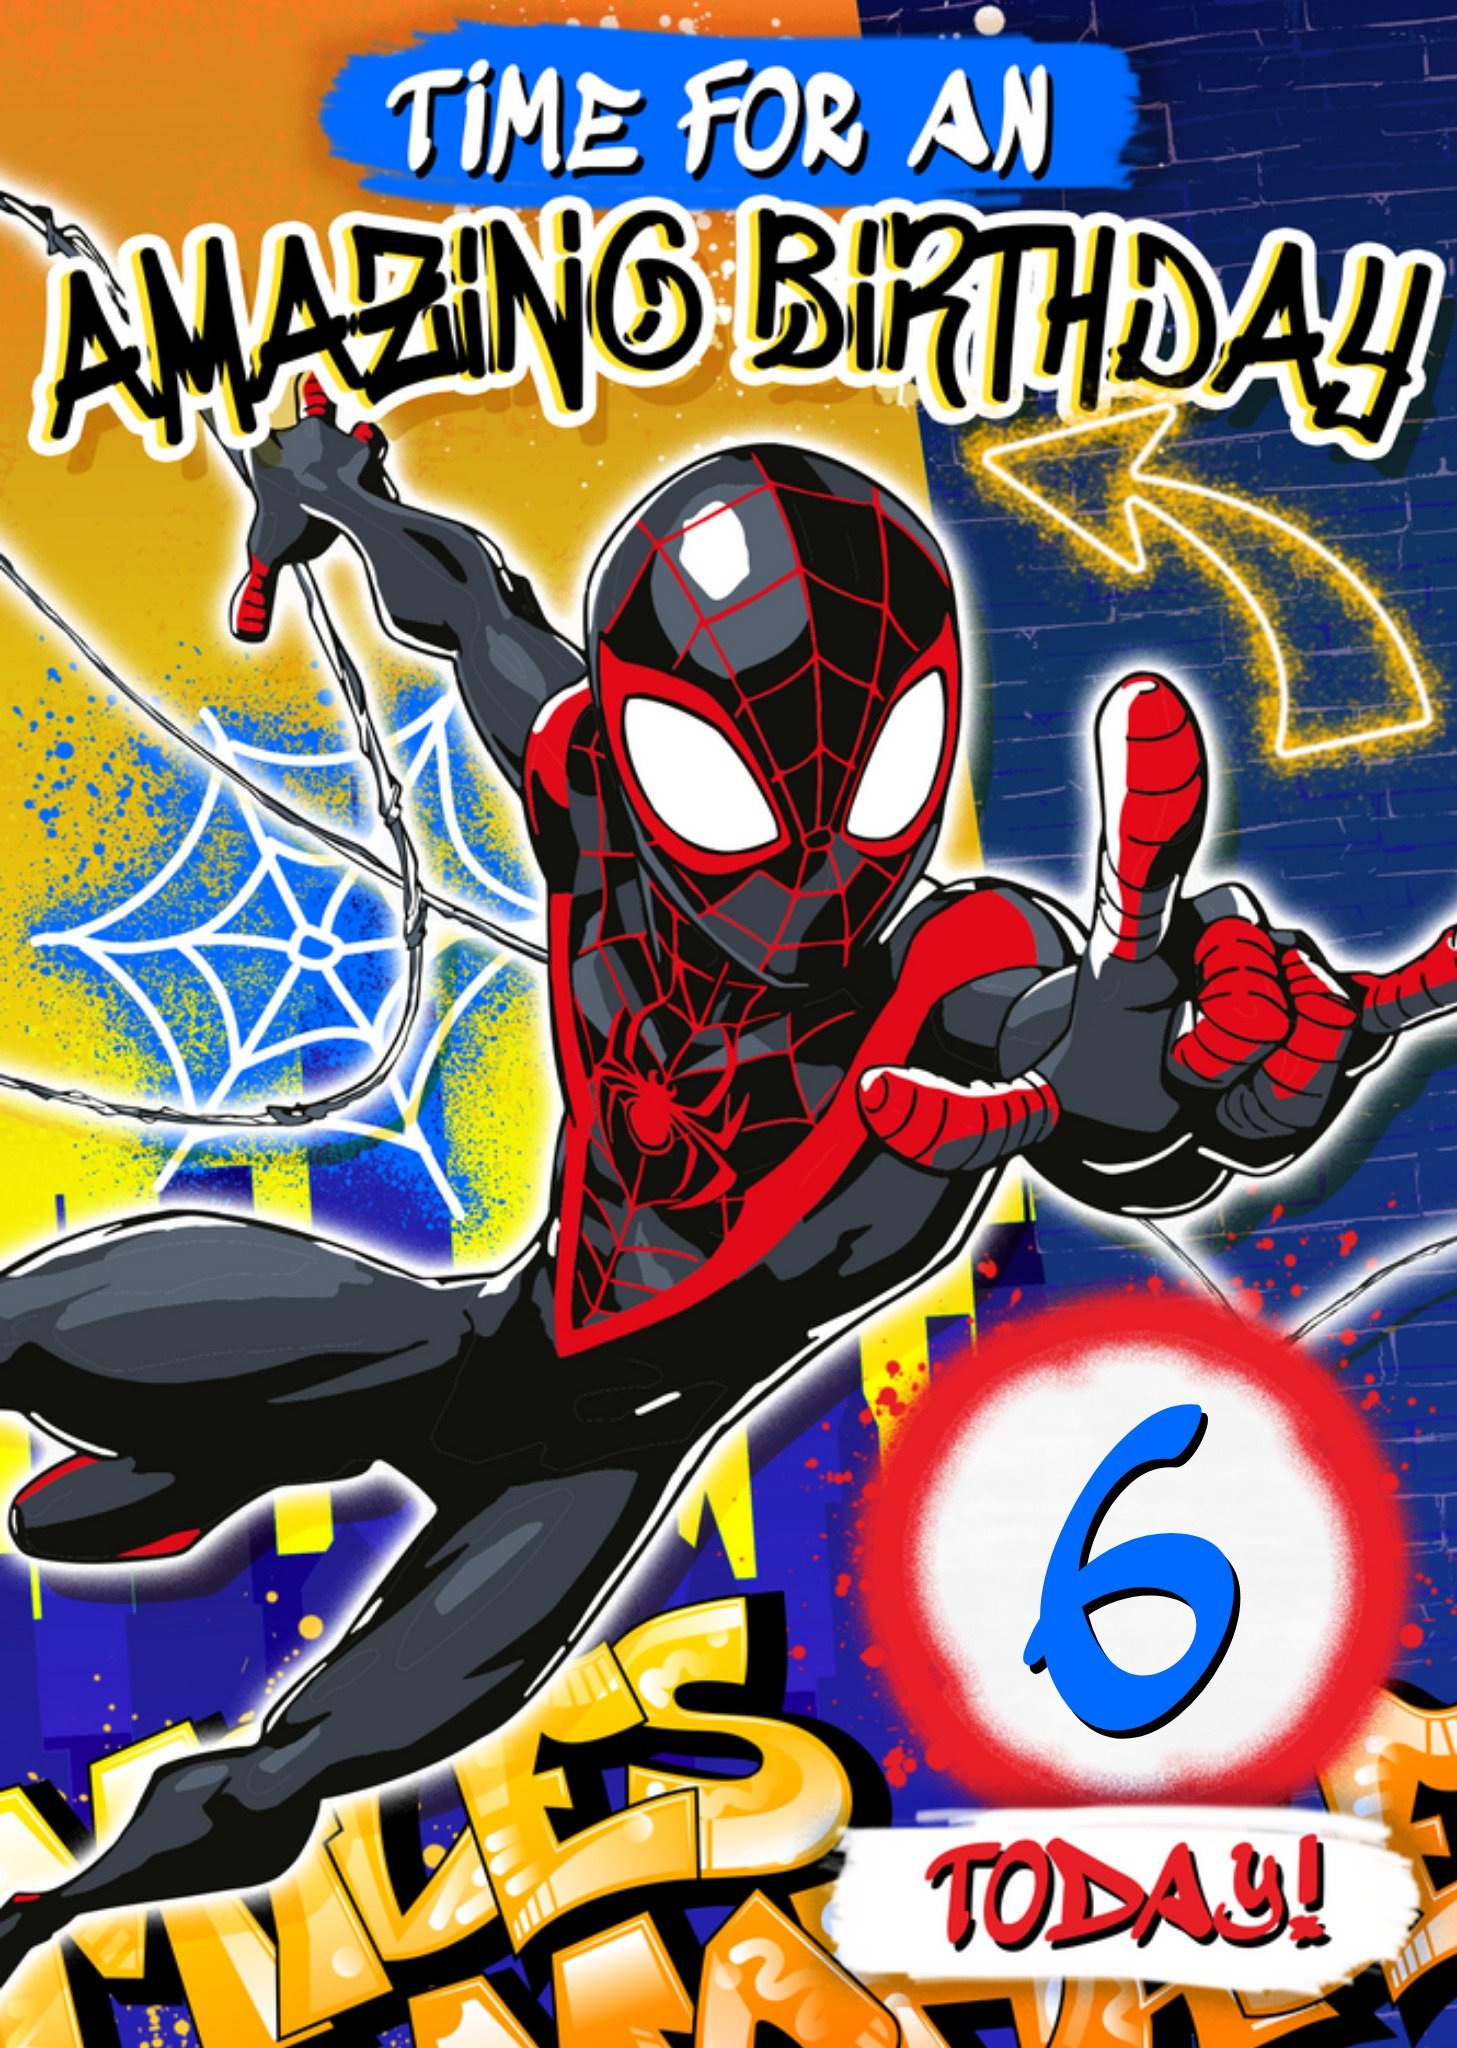 Marvel Spiderman Mile Morales Time For An Amazing Birthday 6 Today Birthday Card Ecard